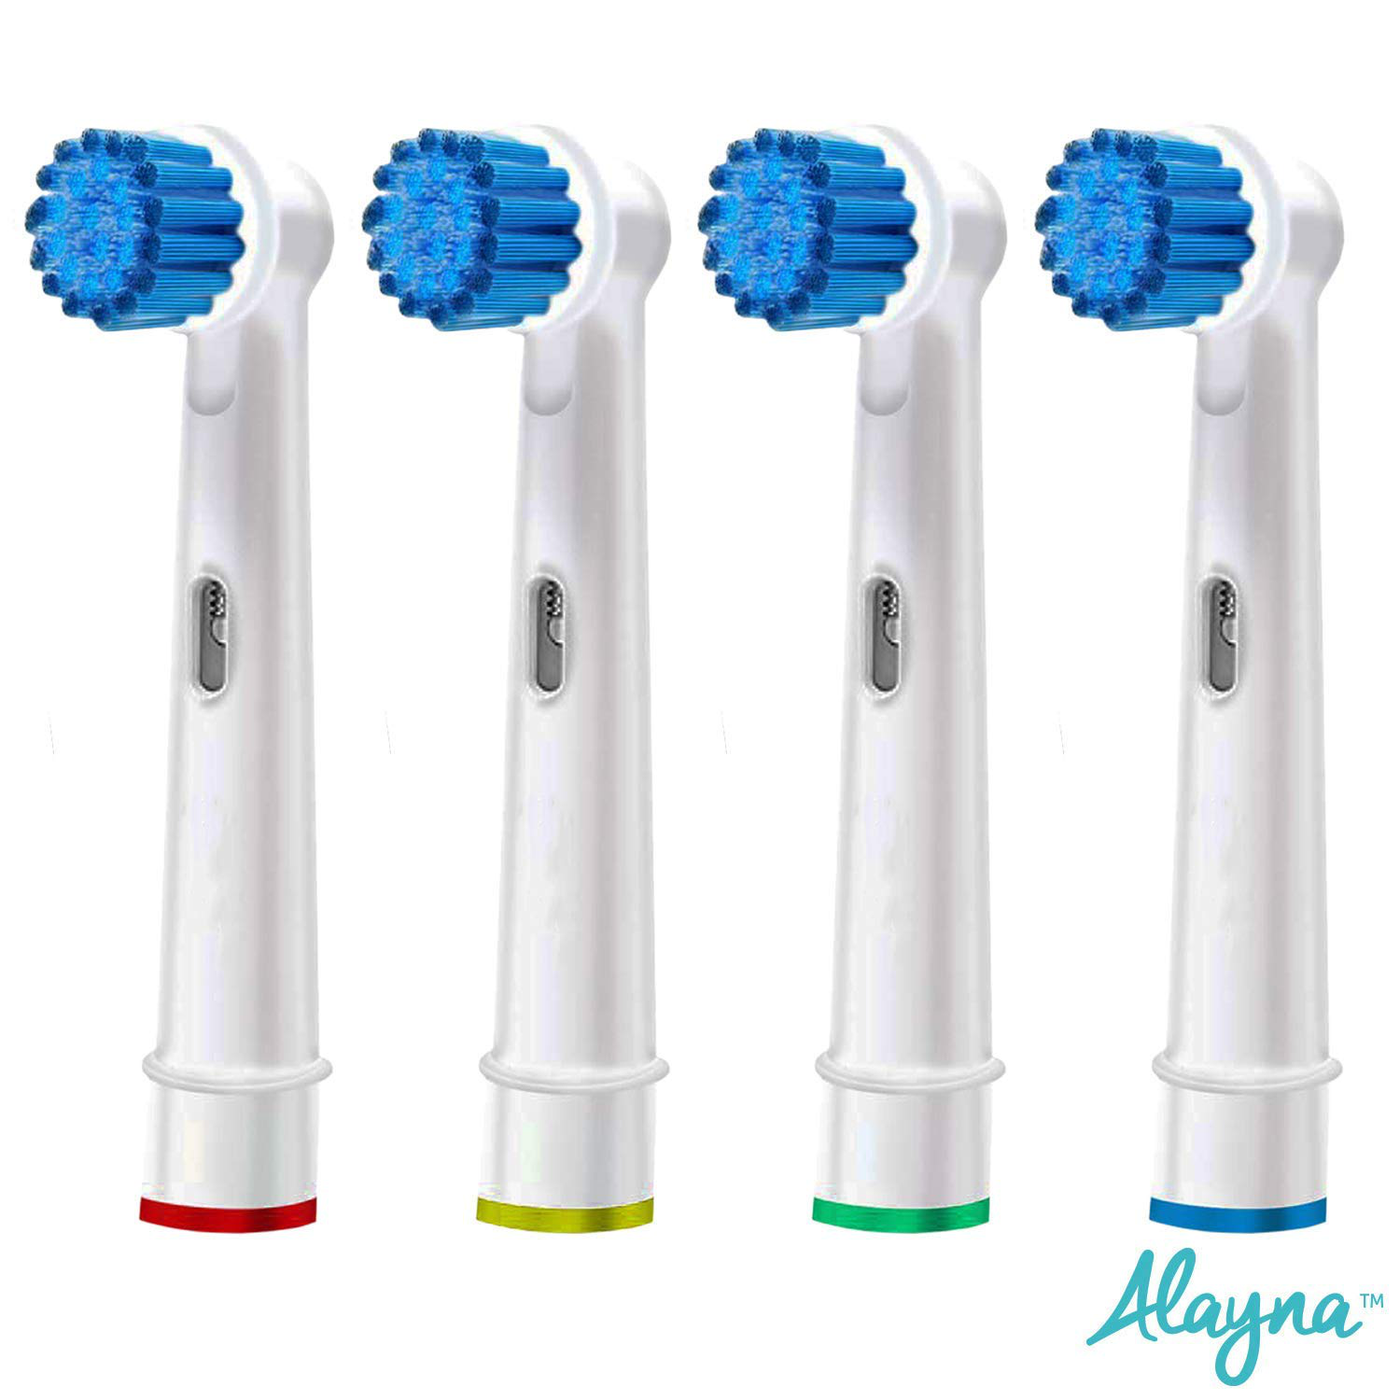 Replacement Brush Heads Compatible With Oral b- Sensitive Gum Care Electric Toothbrush Heads - Pk of 4 Generic Brushes Refill for Oralb Braun- Fits Oral-b 7000, Pro 1000 500 & More!